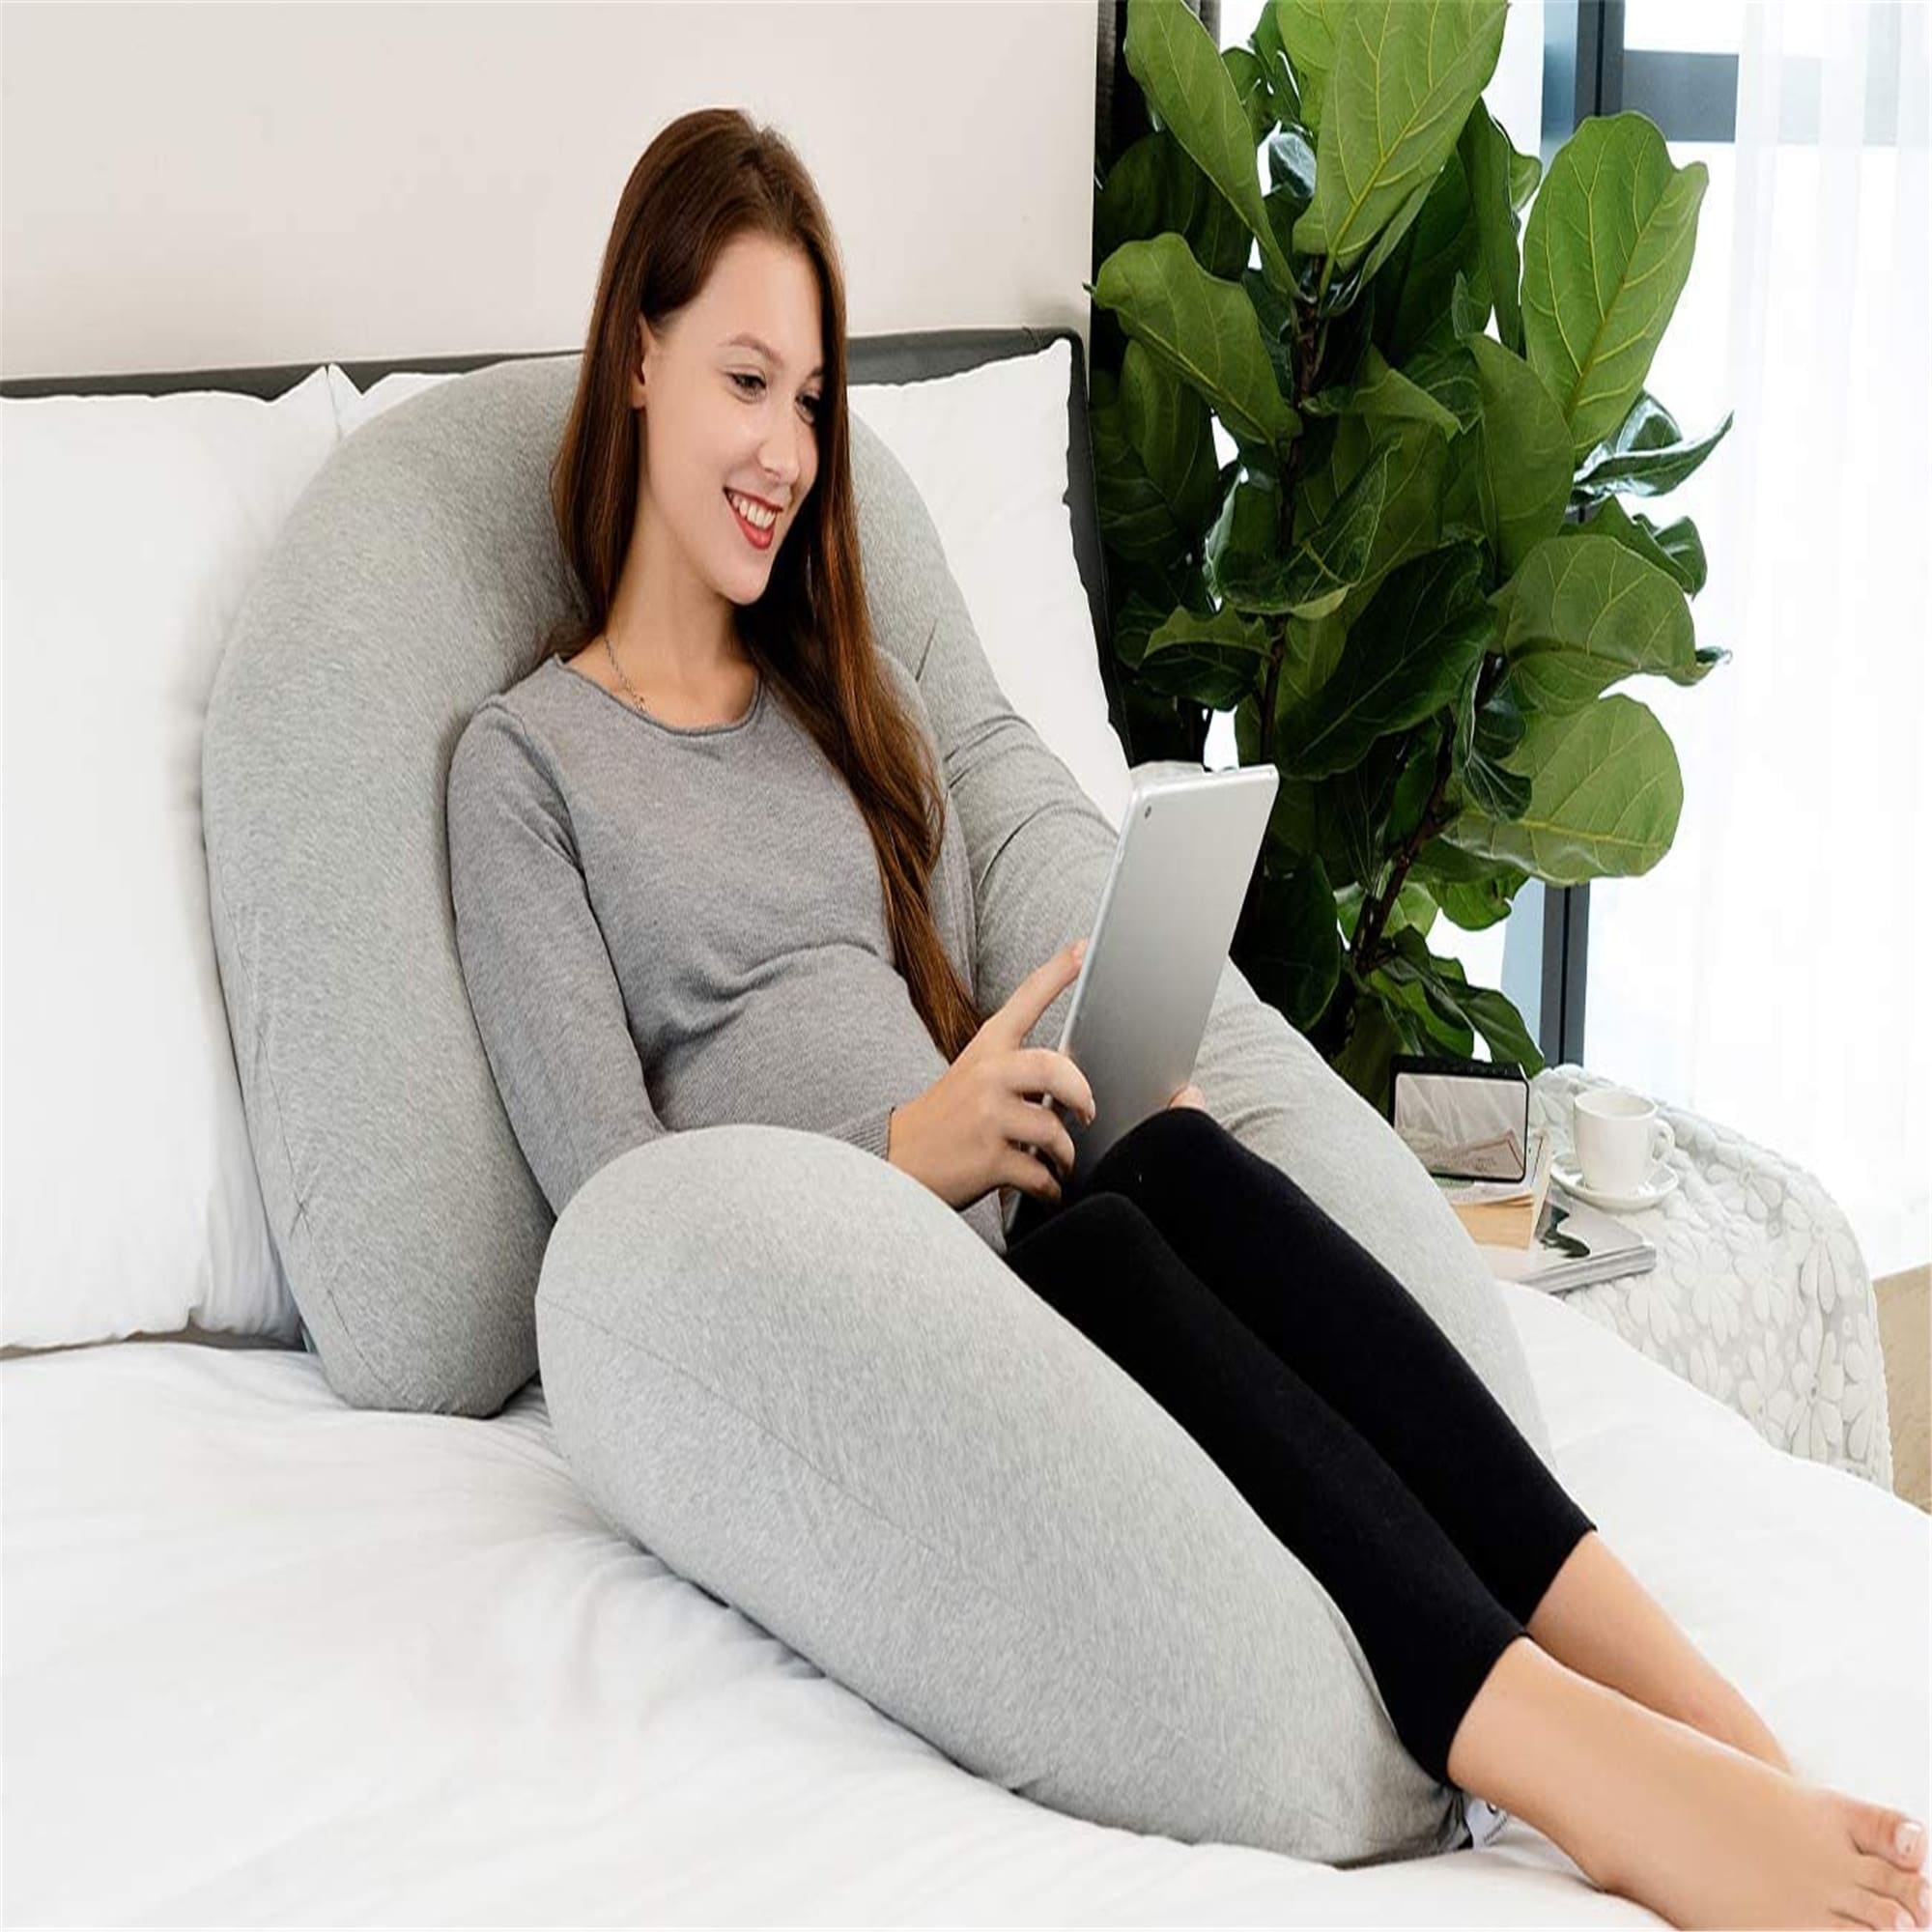 Legs Neck & Belly 58 Inch, Gray We Care Premium Pregnancy Pillow for Pregnant Woman U Shaped Full Body Maternity Pillow Supports All Body Including Back Velvet 